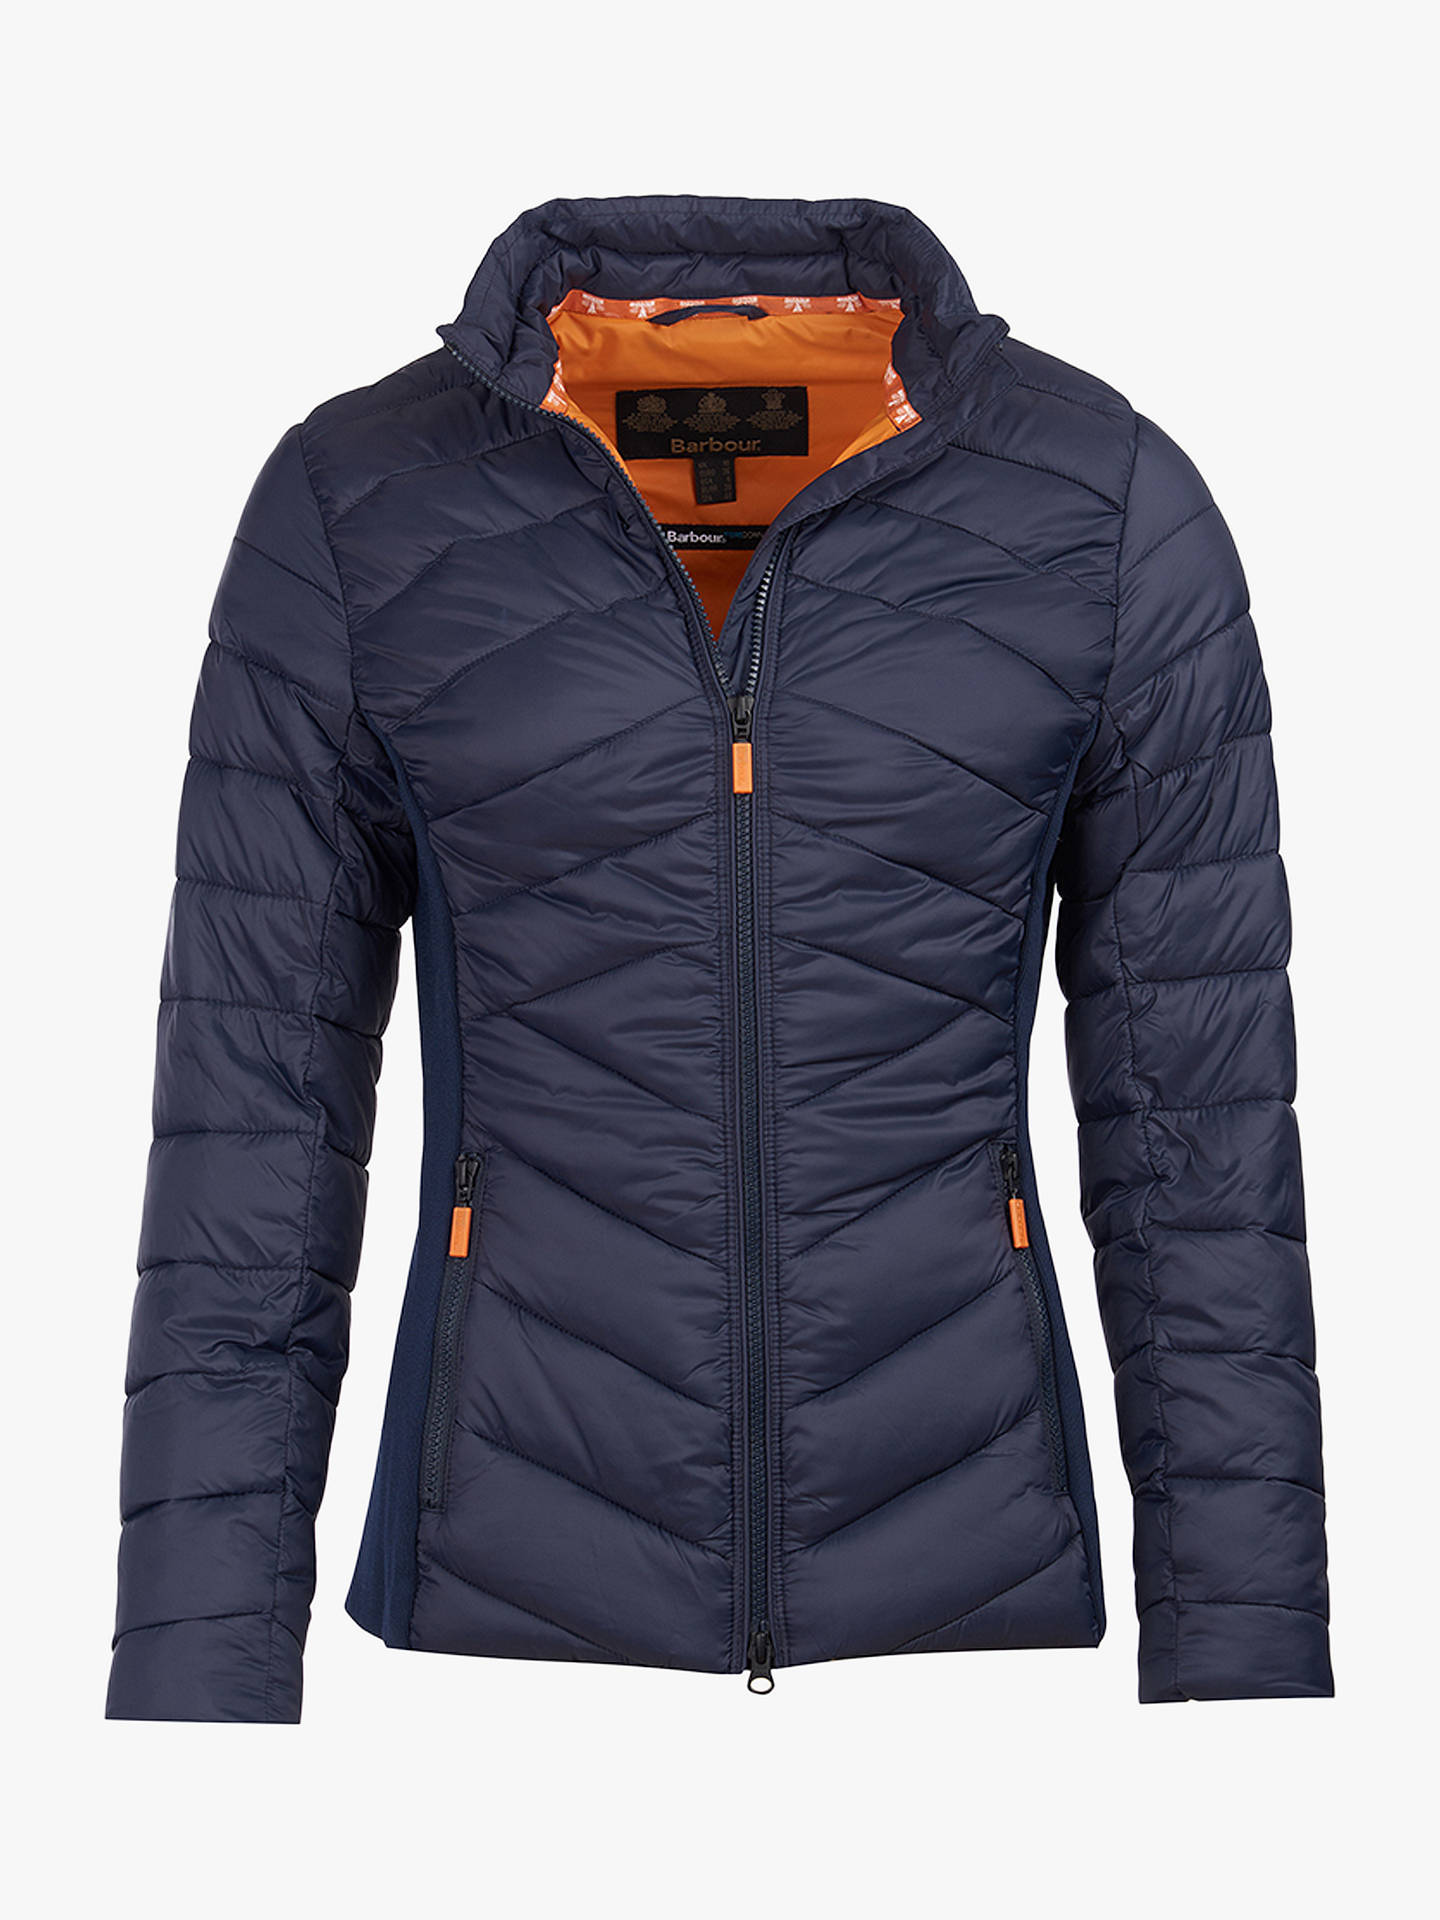 Barbour Longshore Quilted Jacket in 